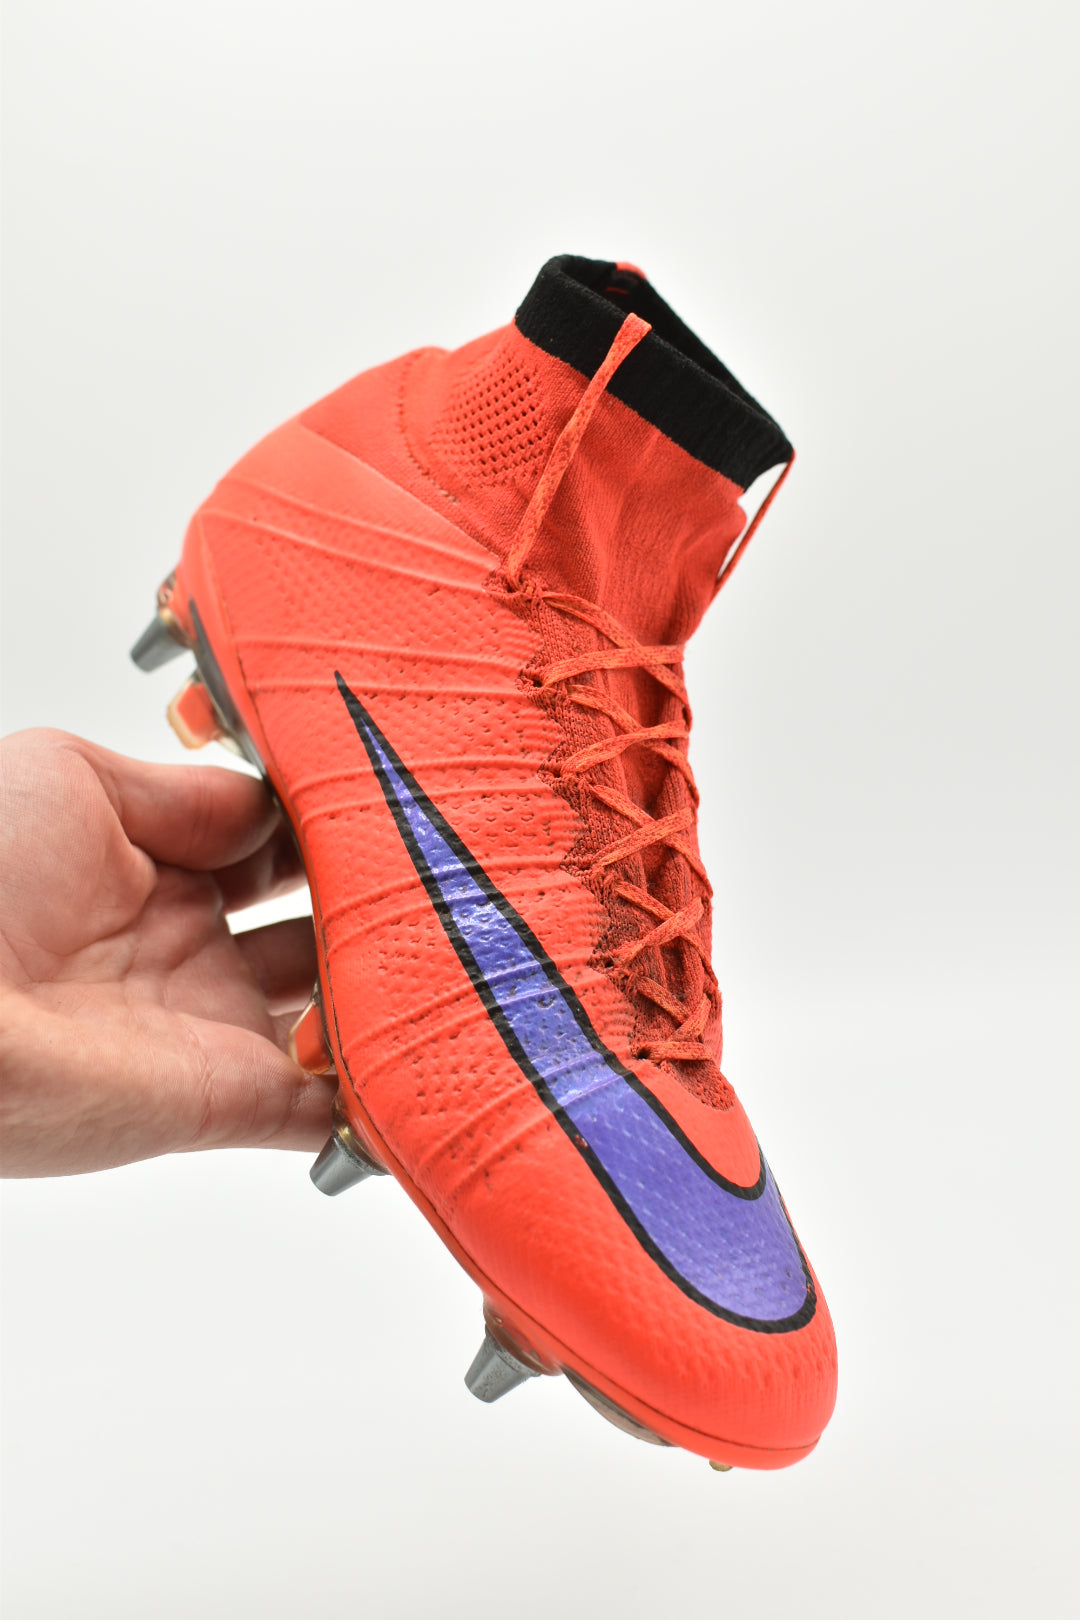 SUPERFLY IV SG-PRO – Boot Collector (DBC)